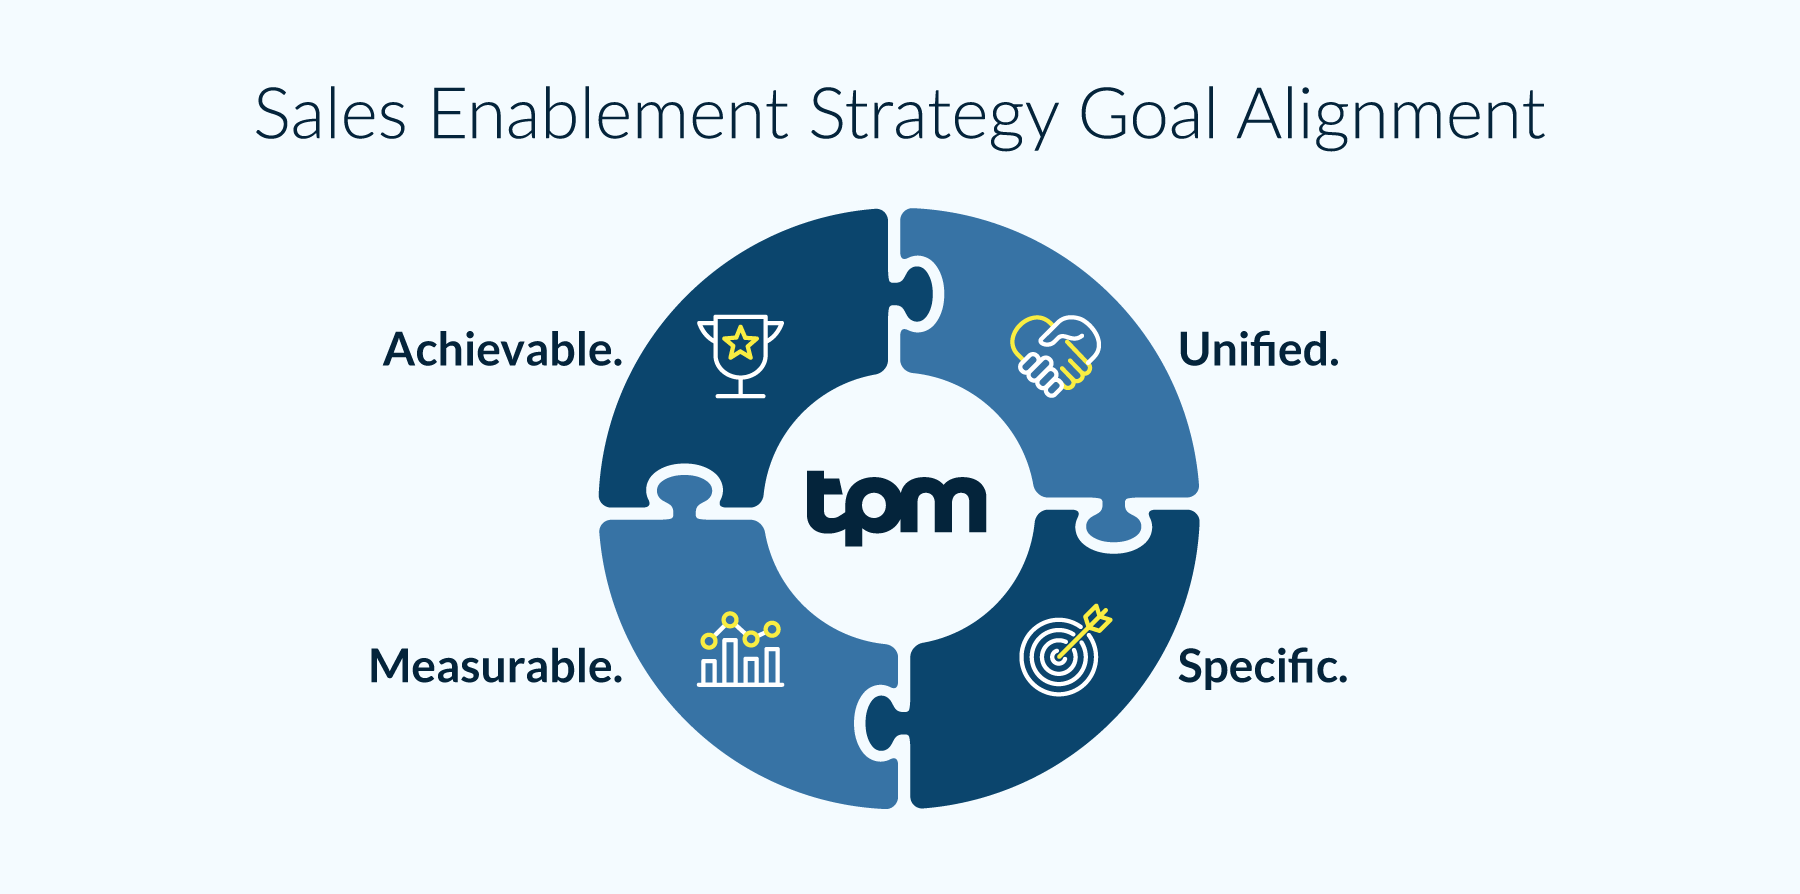 Sales Enablement Strategy Goal Alignment